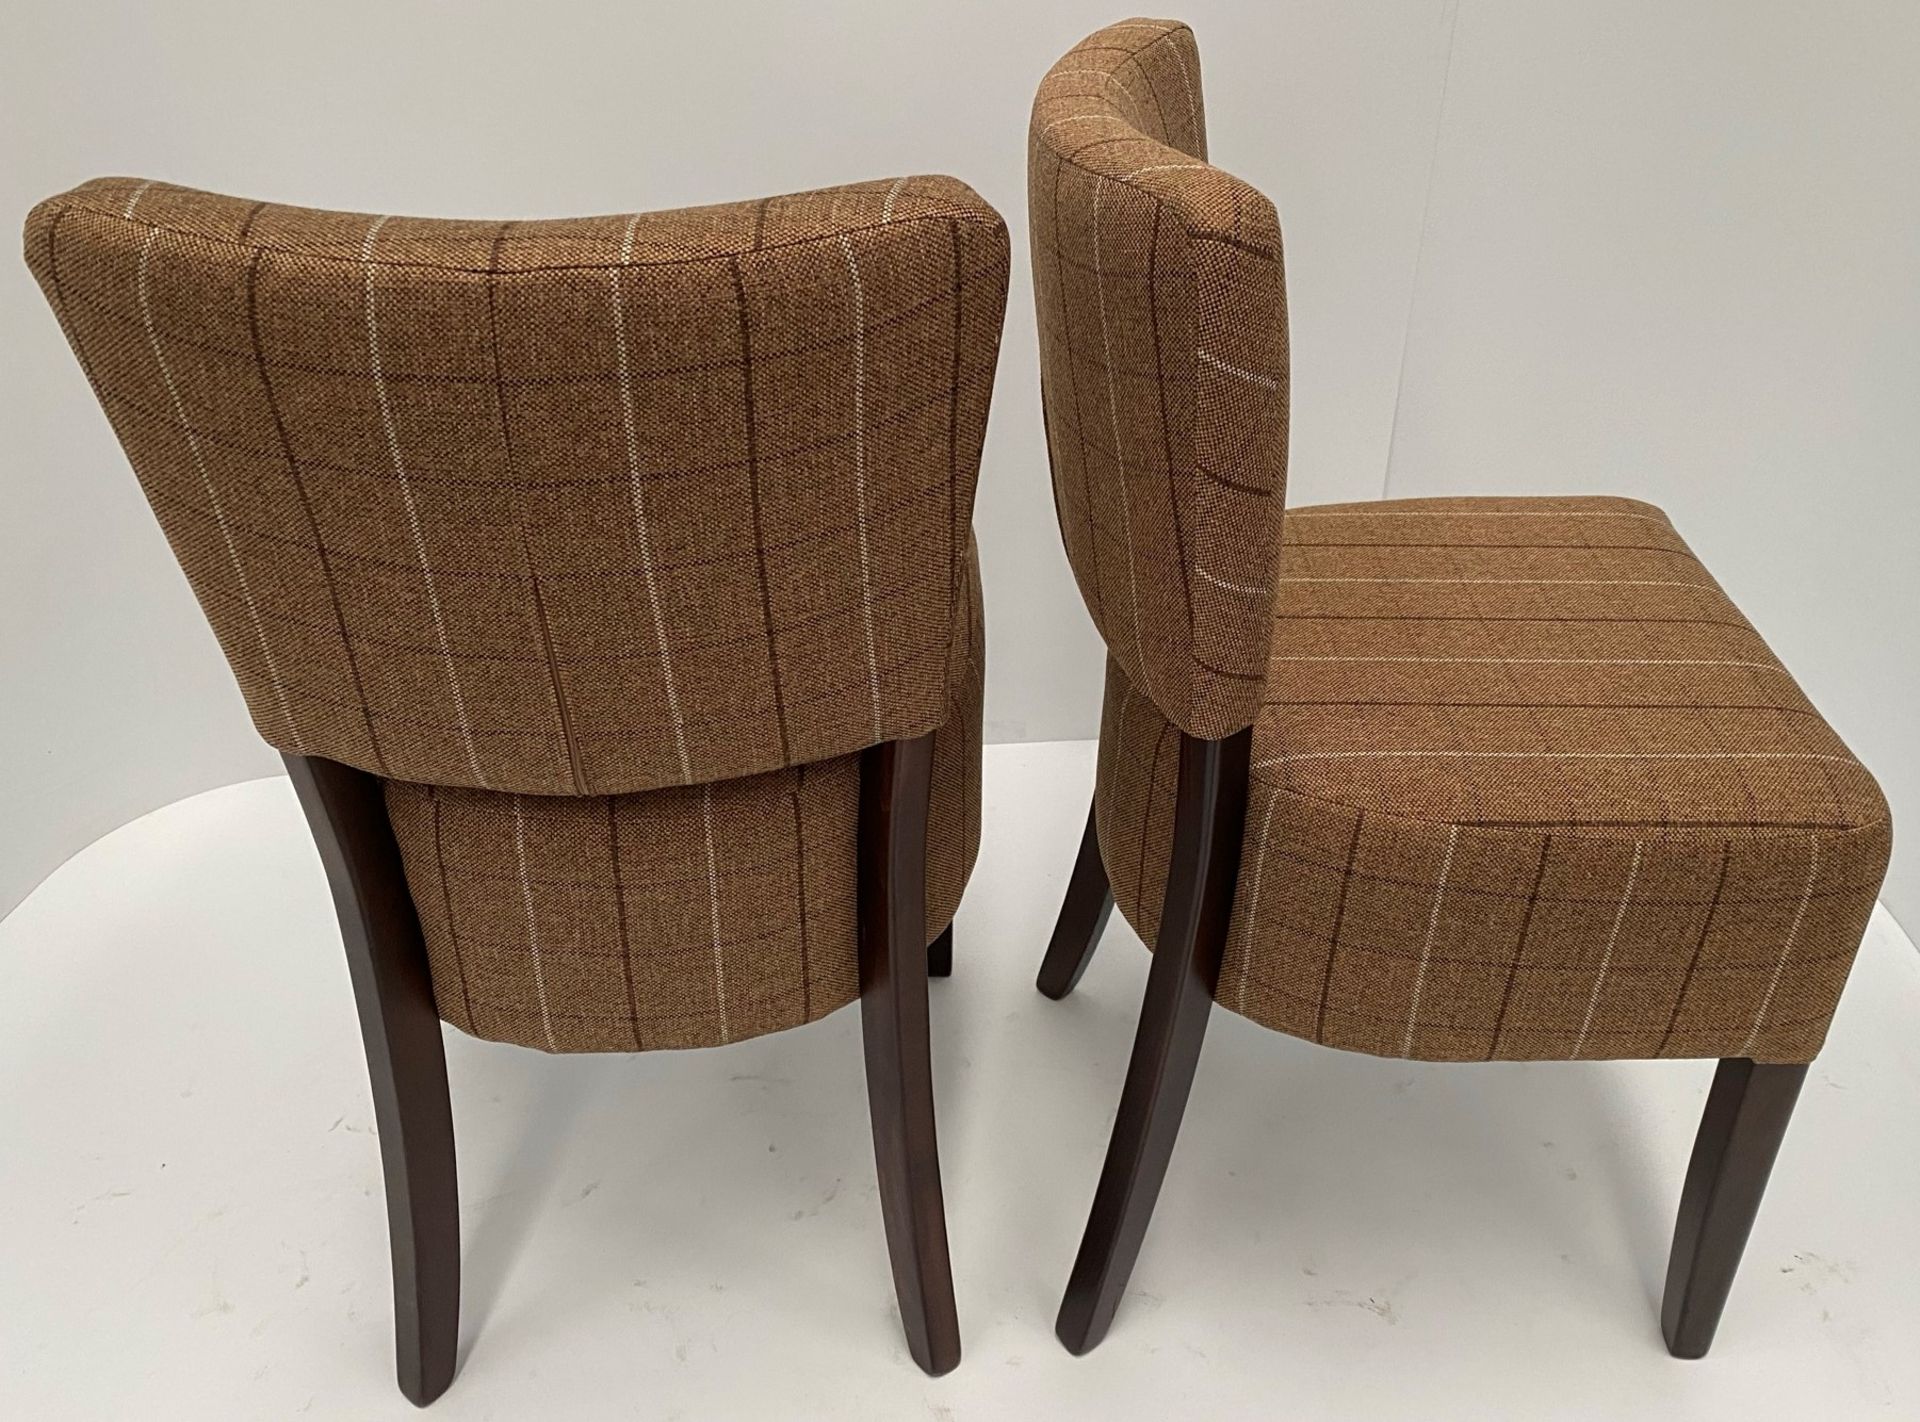 2 x Memphis Panaz Calroust Berwick Caramel 808 side/dining chairs with walnut coloured frames - Image 2 of 3